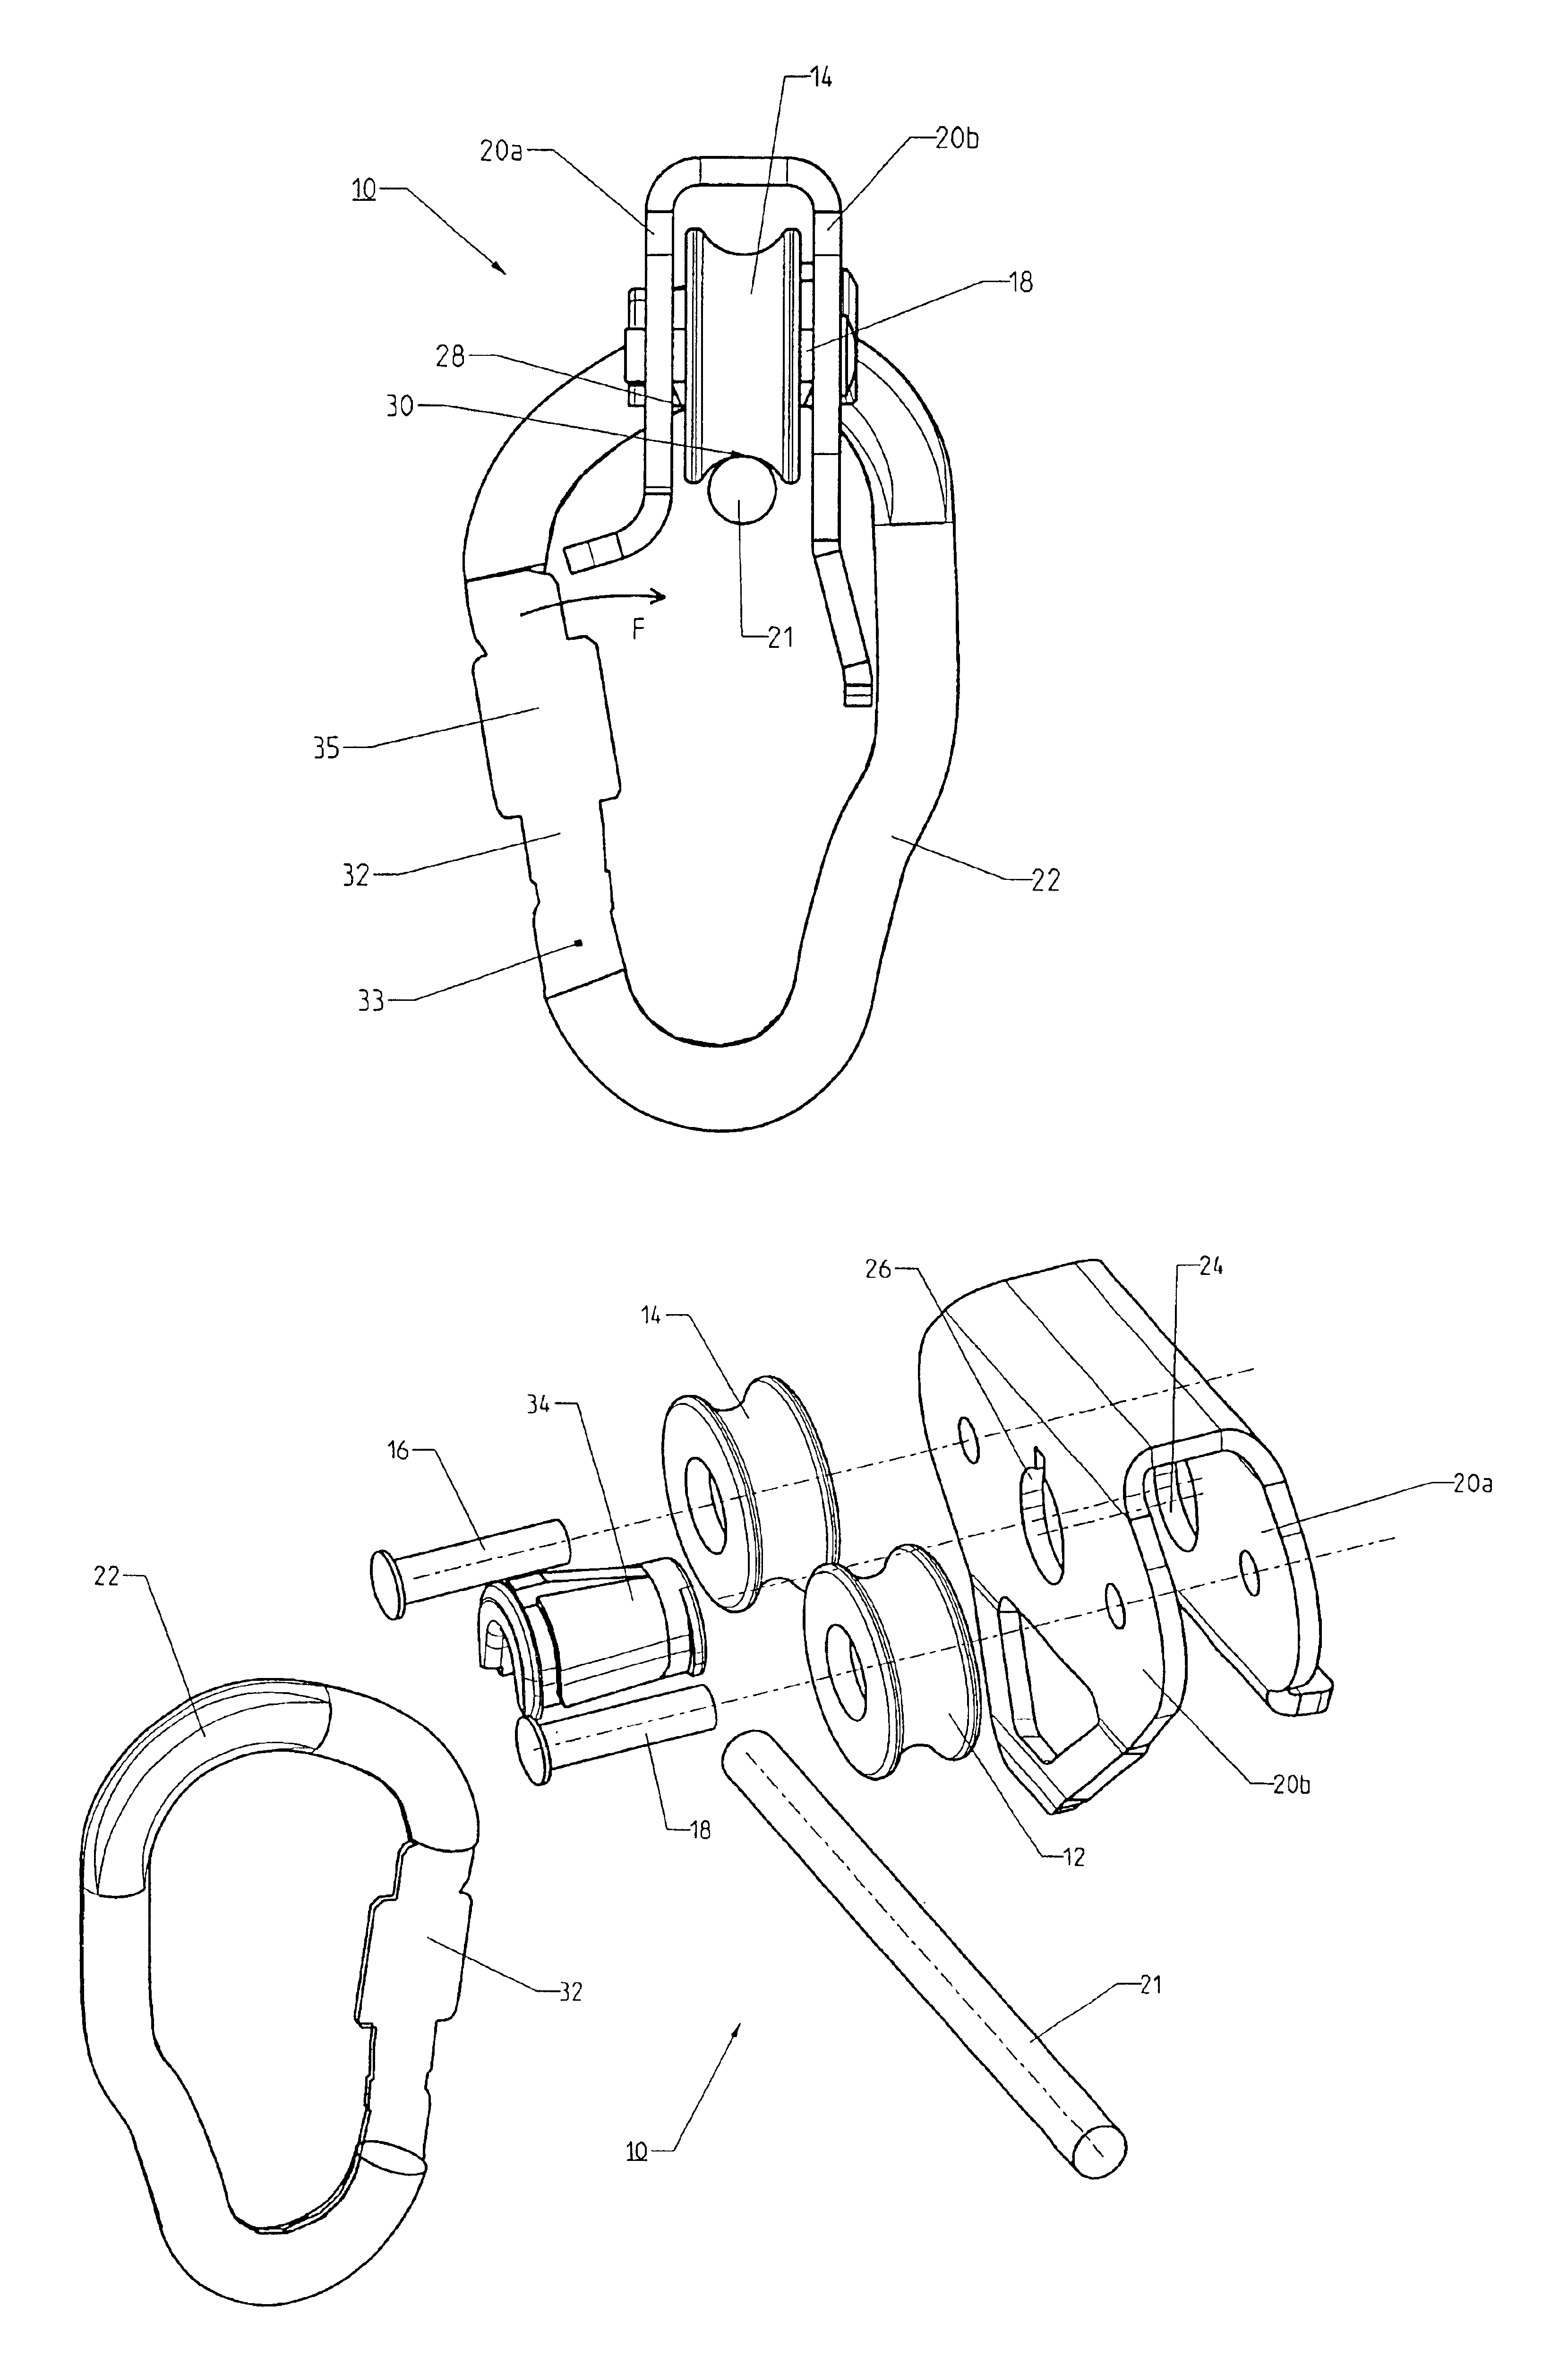 Double pulley device for use for zip-line traversing on a rope or cable